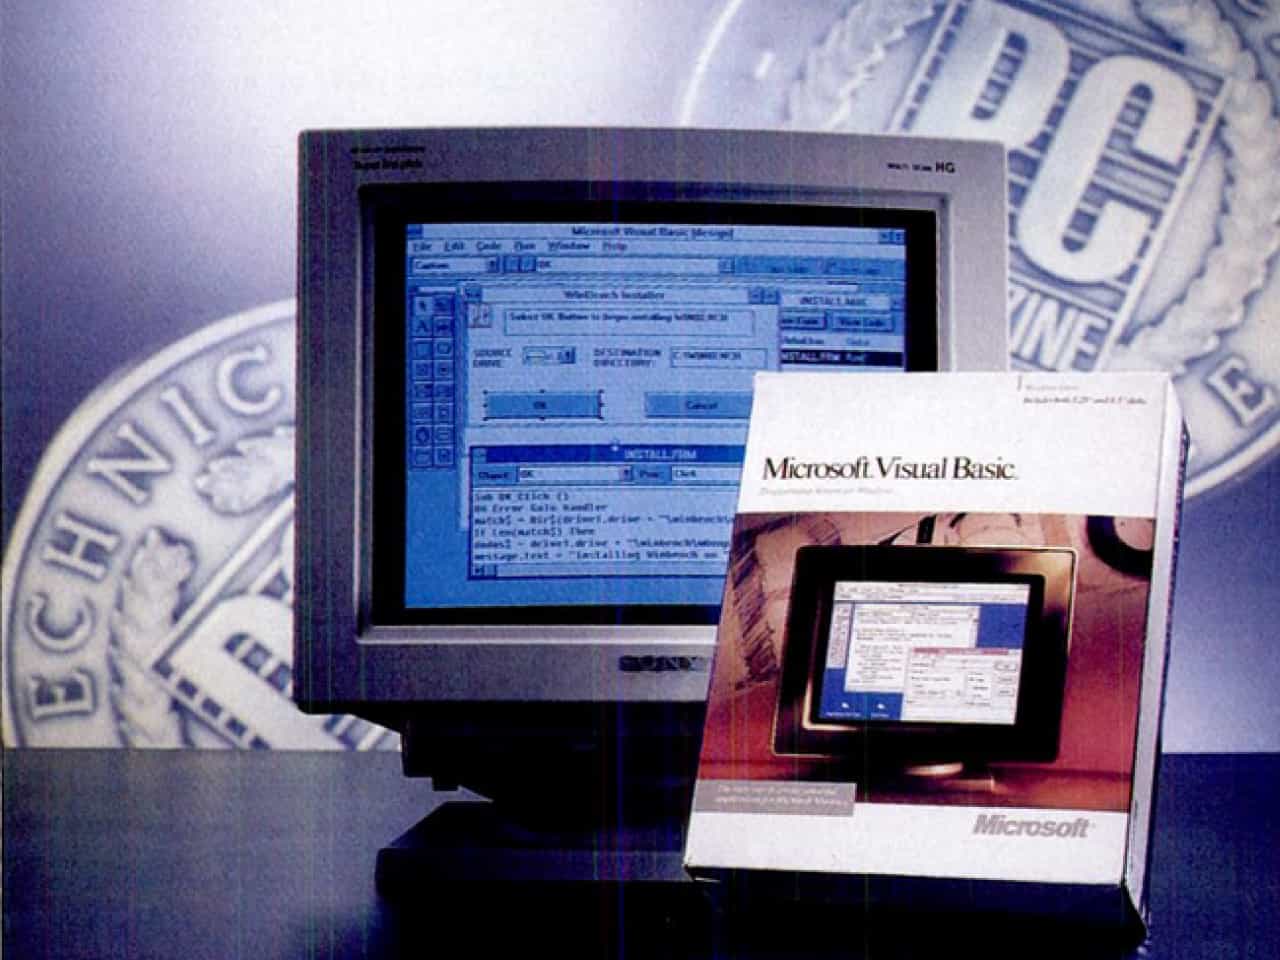 A picture of a CRT monitor with Visual Basic 1.0 on it. In front of that is a manual titled 'Microsoft Visual Basic'.